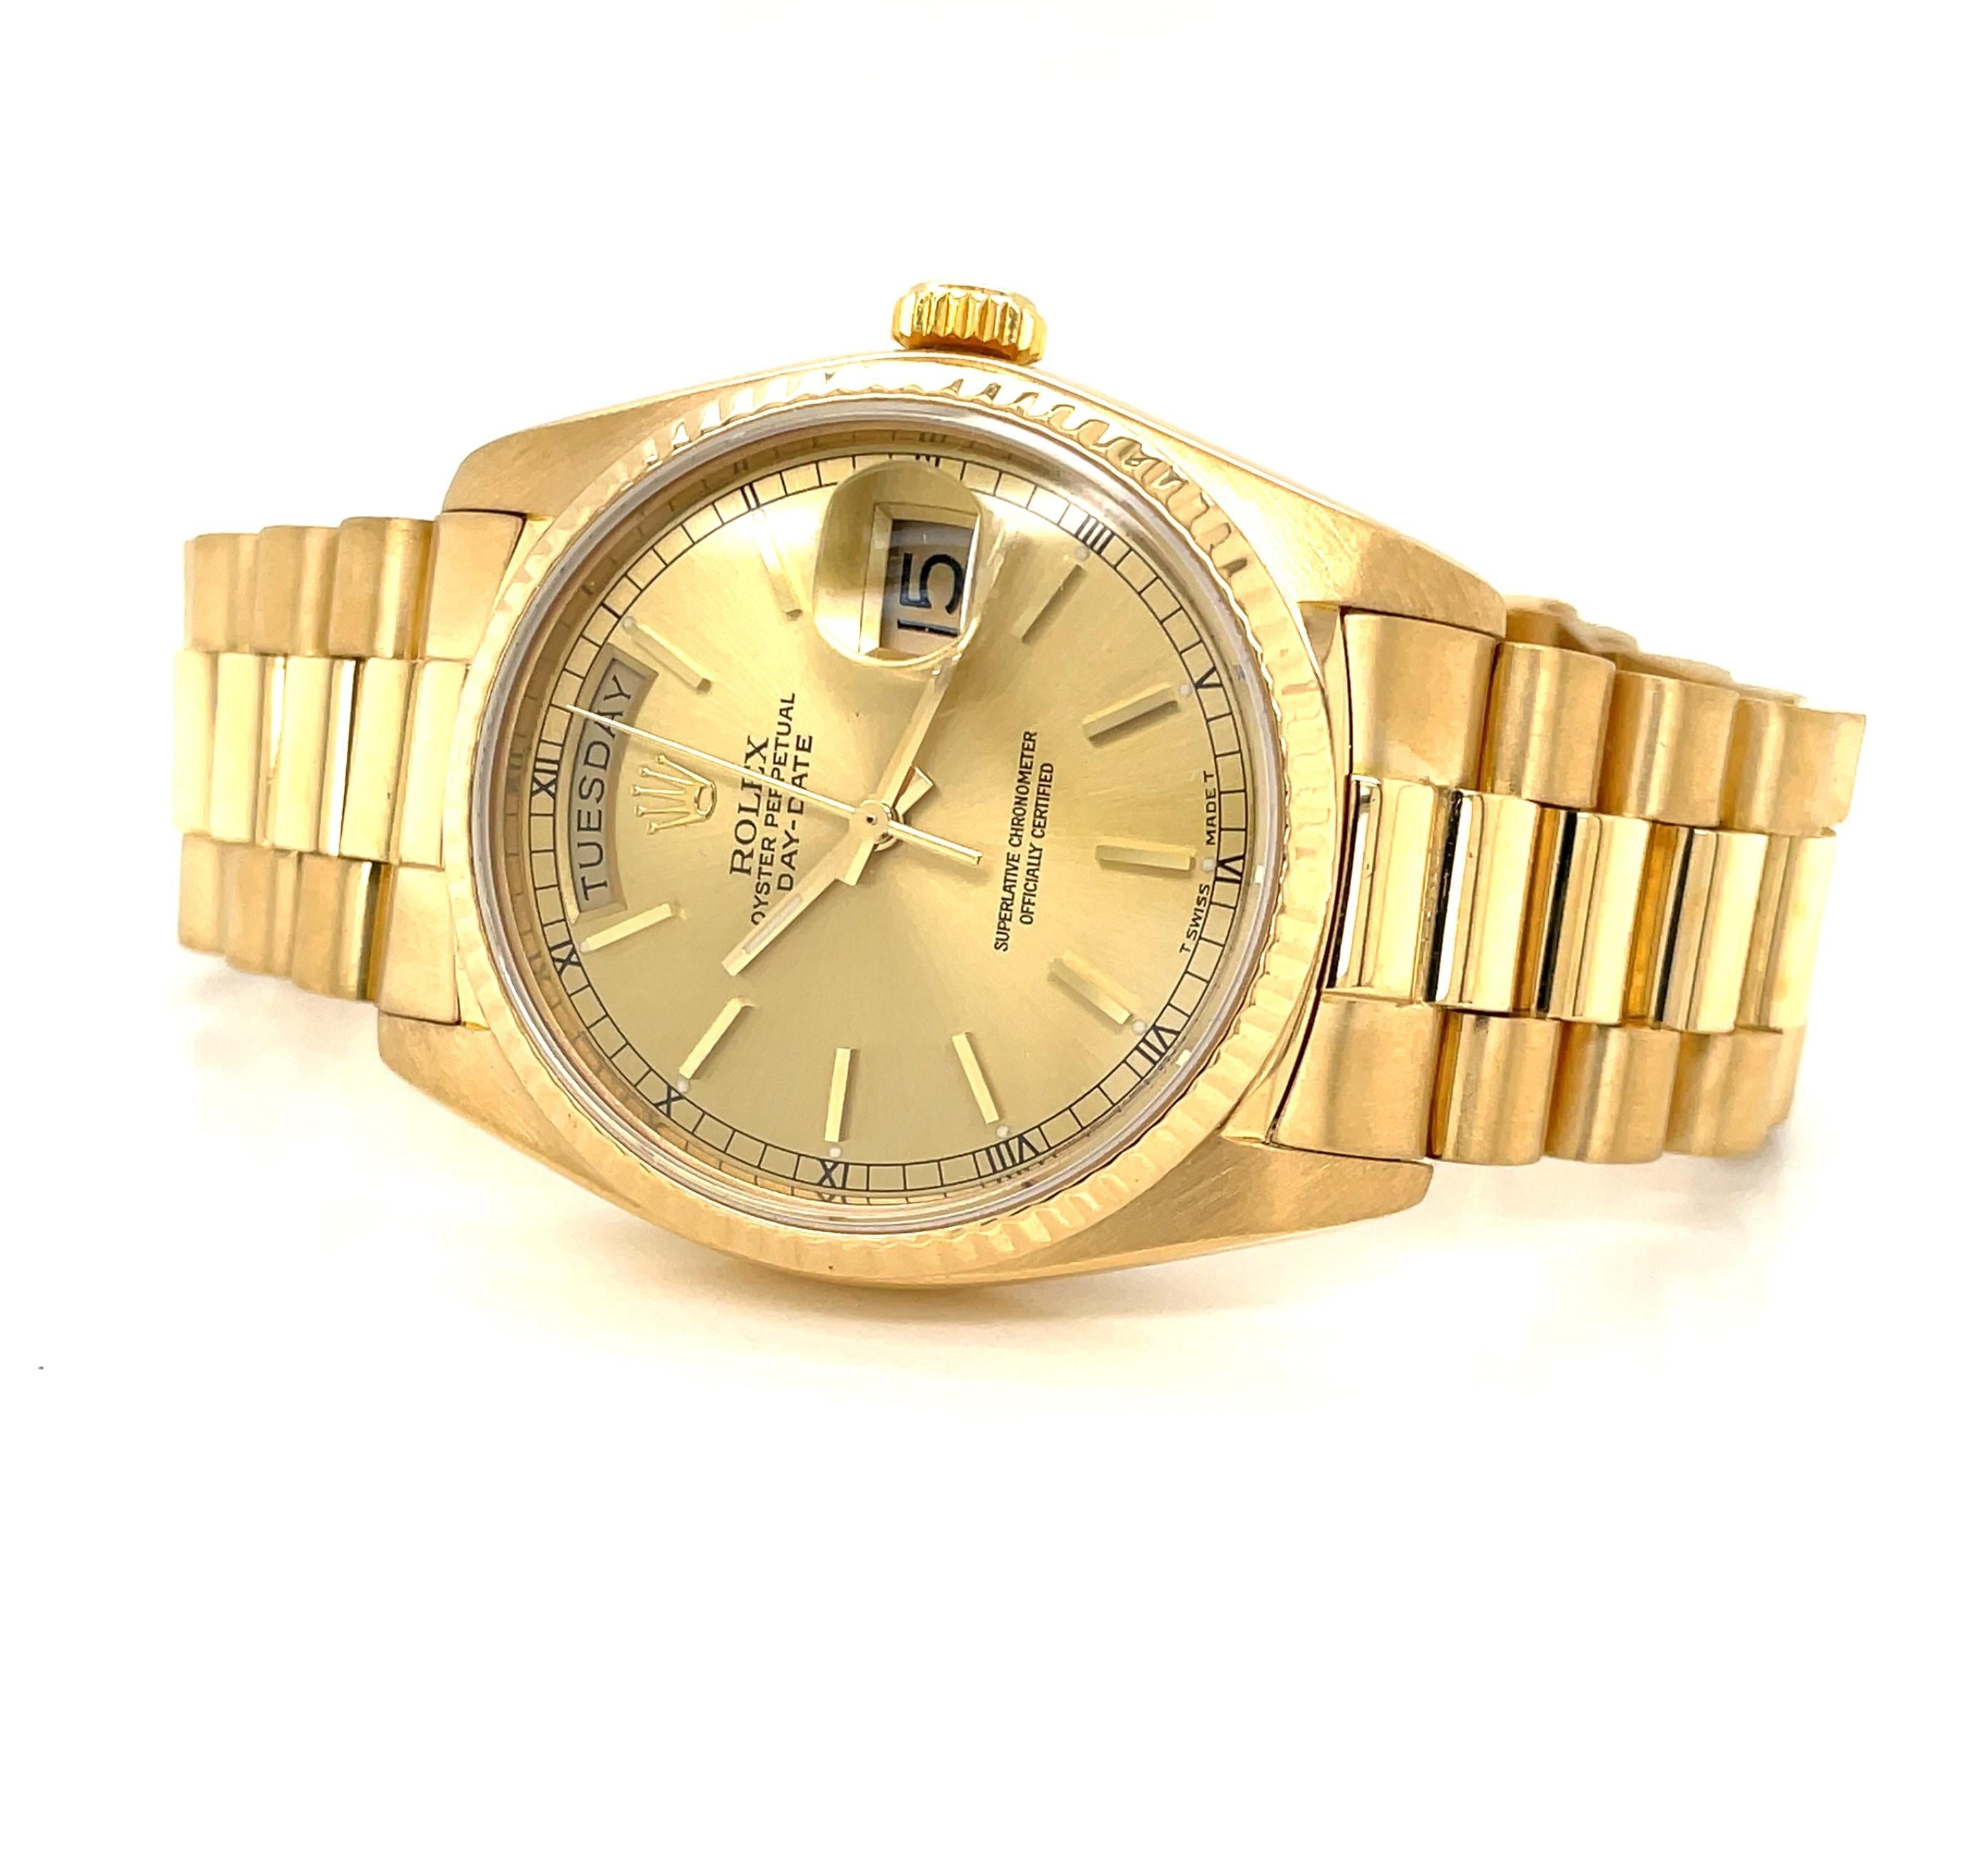 In rich eighteen karat 18K yellow gold, enjoy this iconic Rolex President 3055 Oyster Perpetual Day Date 36mm Men's Luxury Wrist Watch Model 18038. Circa 1983, this iconic style by Rolex style was worn by many of the influential movers and shakers